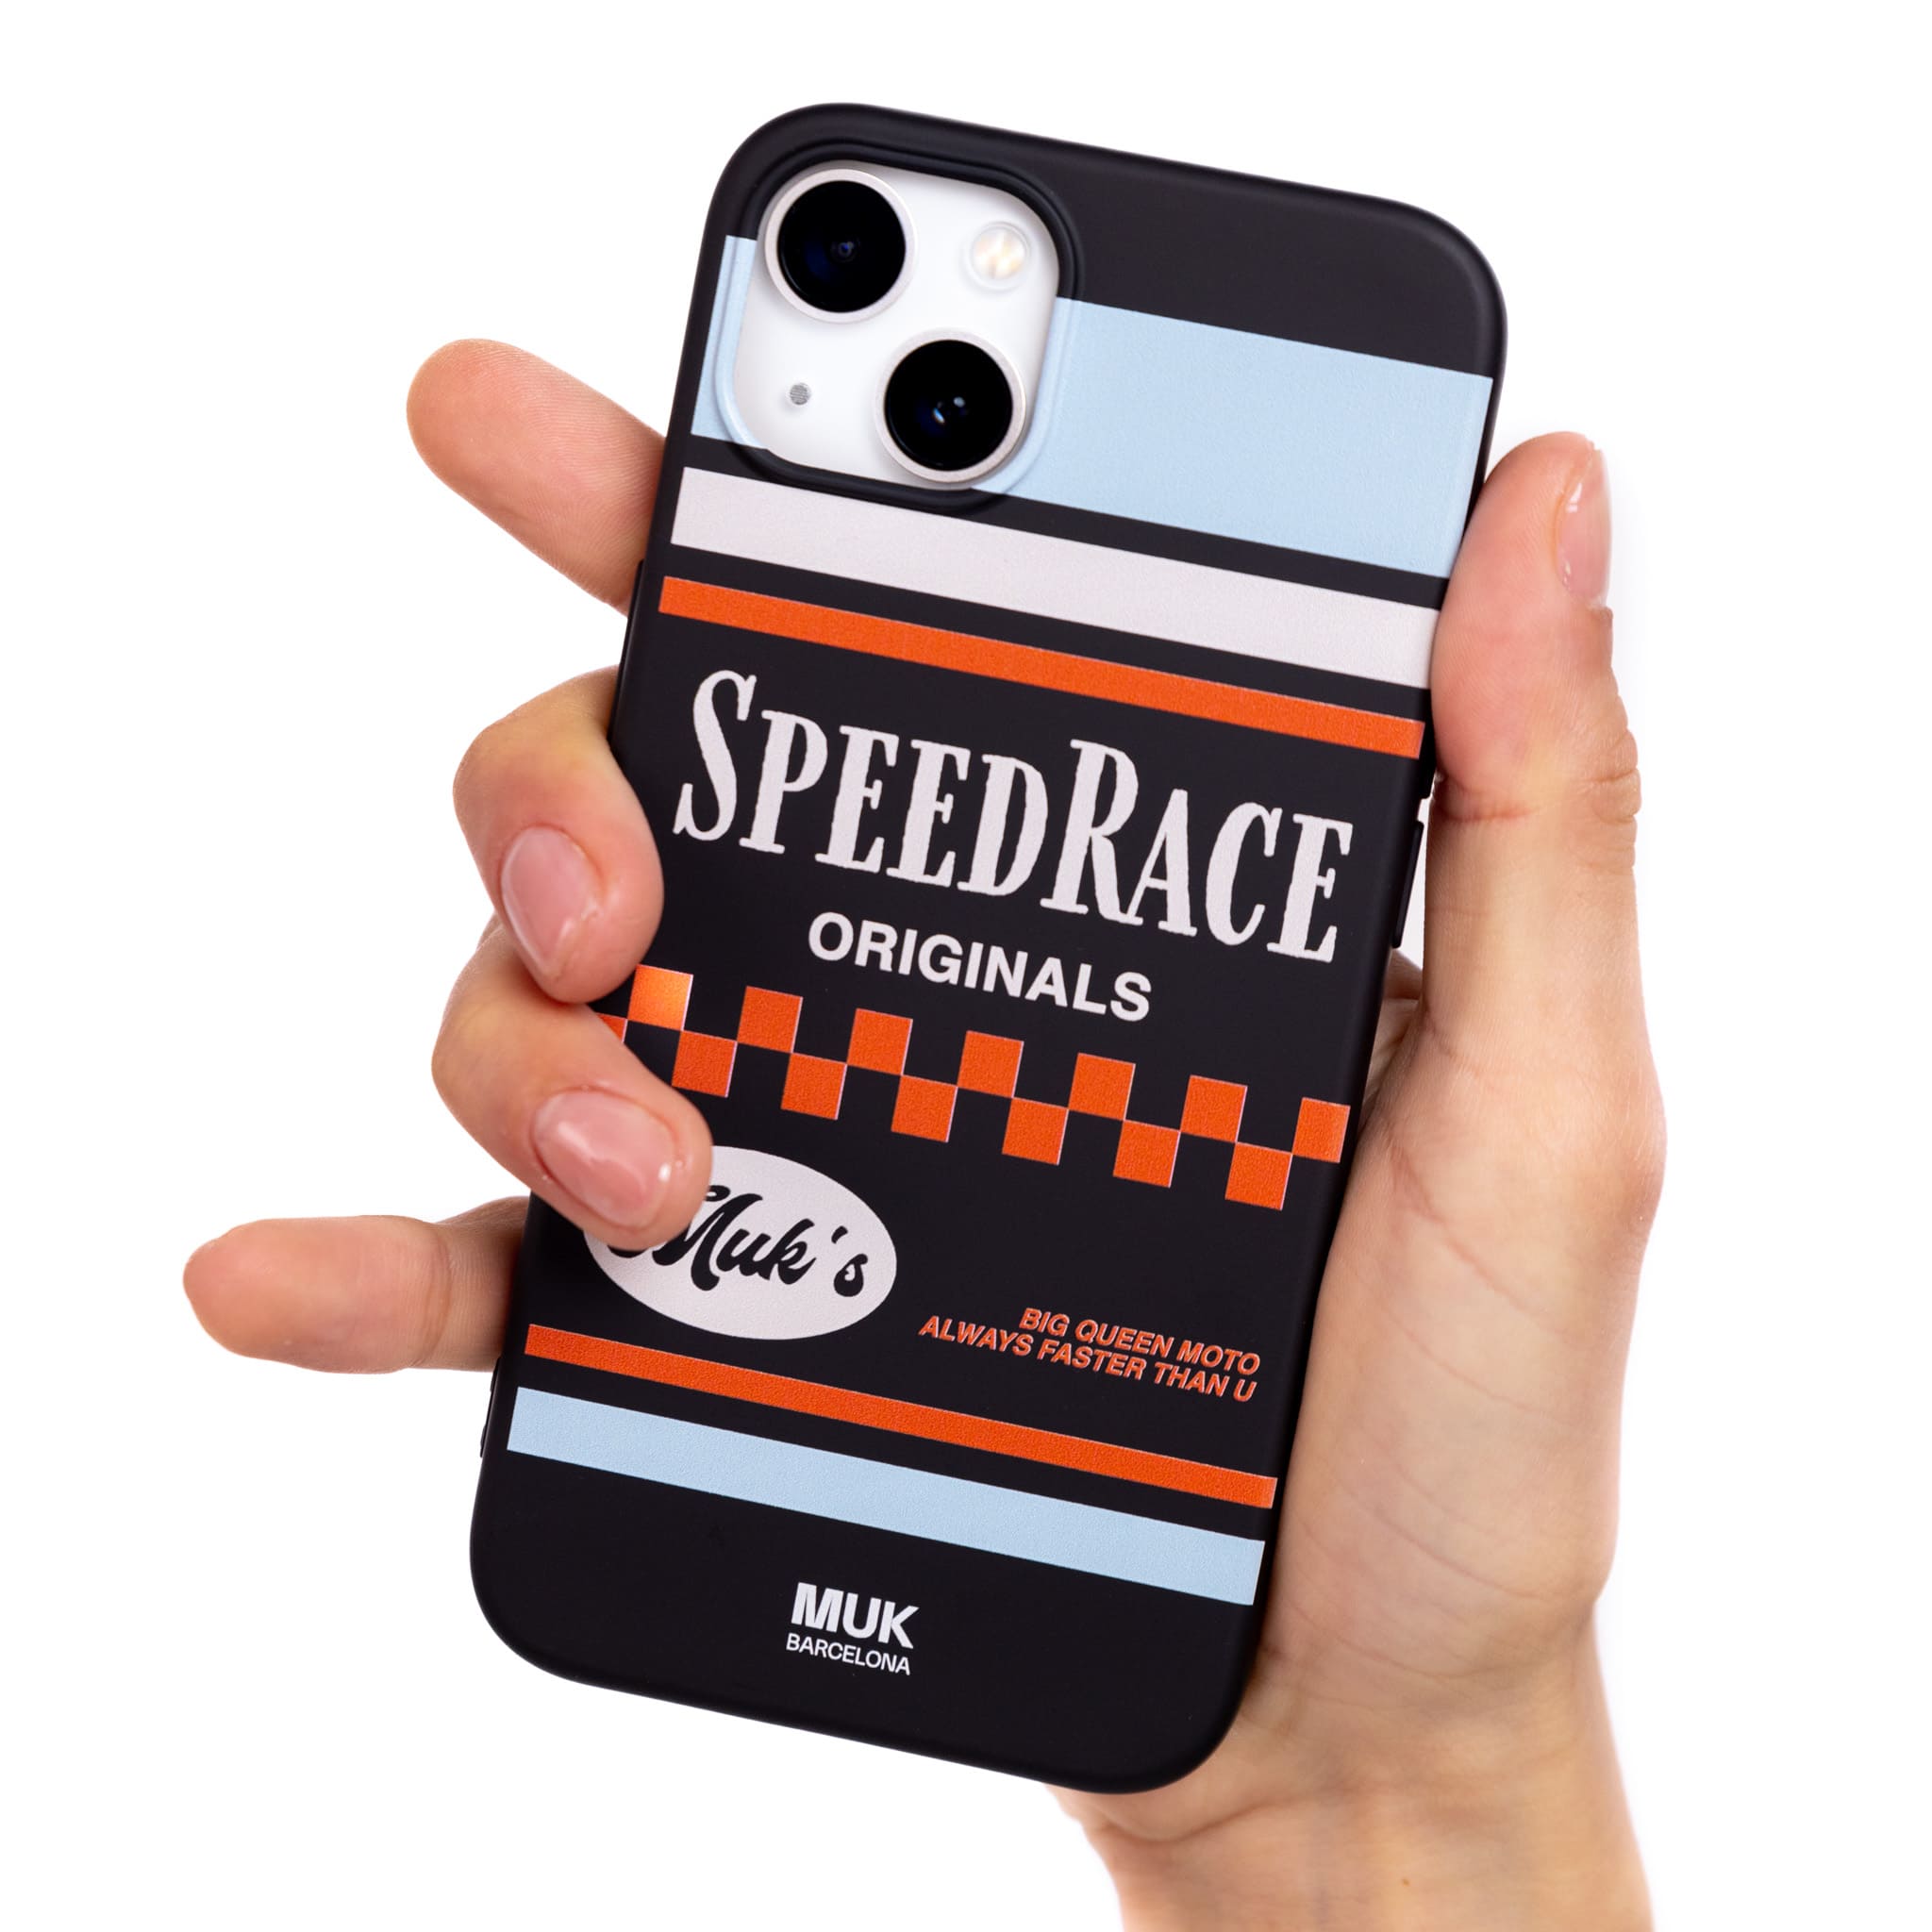  Black TPU  case with biker style and the phrase "speed race" in white.
